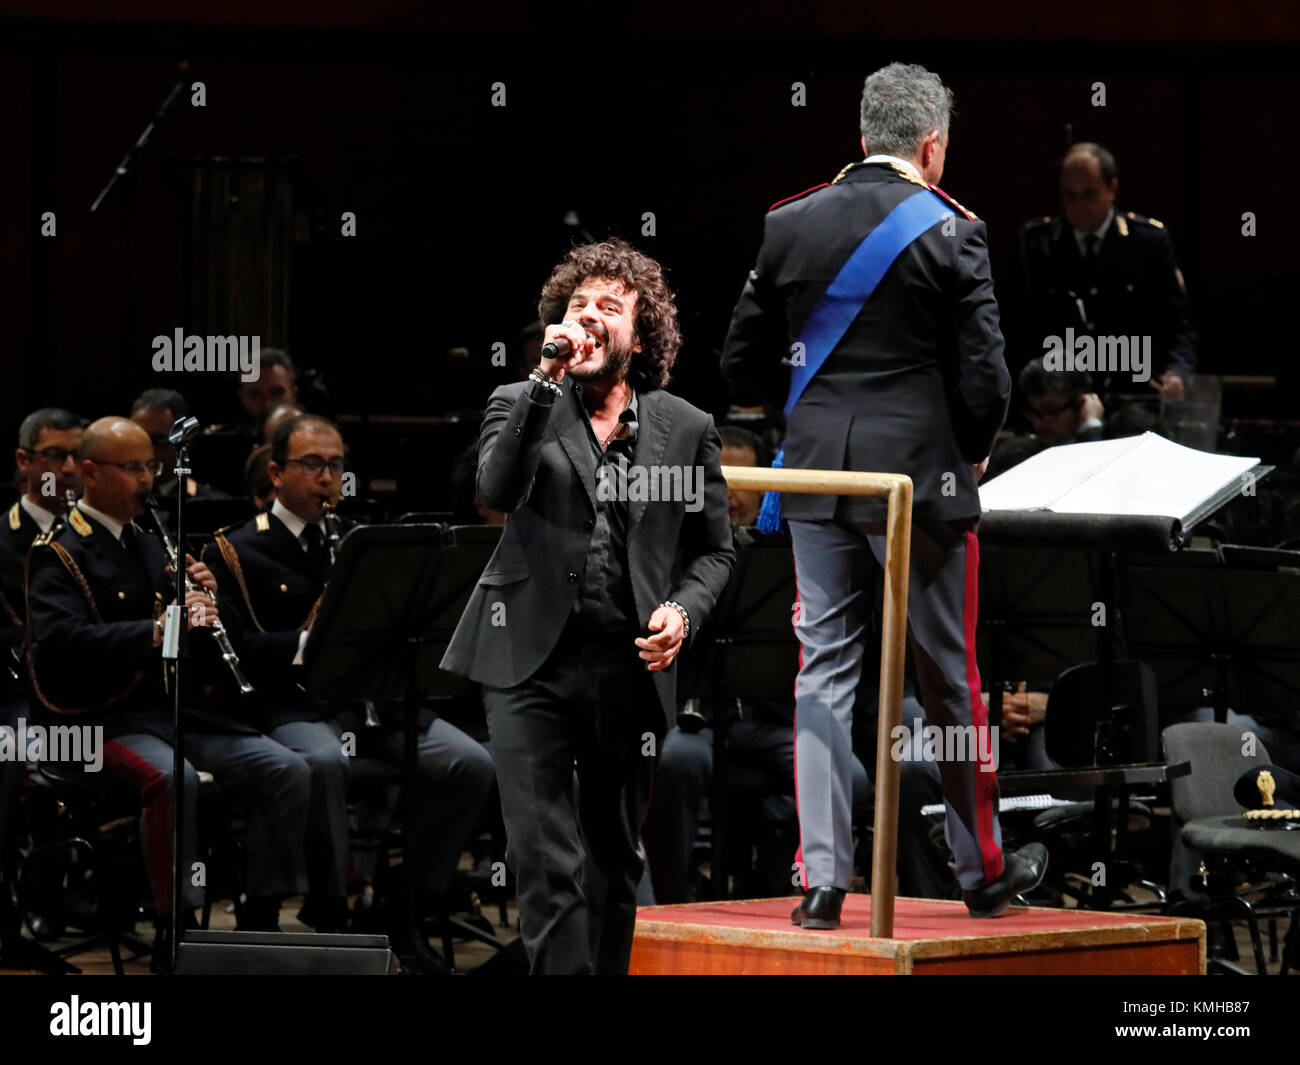 Rome, Italy - 11 December 2017: the singer Francesco Renga on the stage of the Auditorium Parco della Musica, on the occasion of the concert of the State Police Band, 'Be there always, with music and words'. Stock Photo